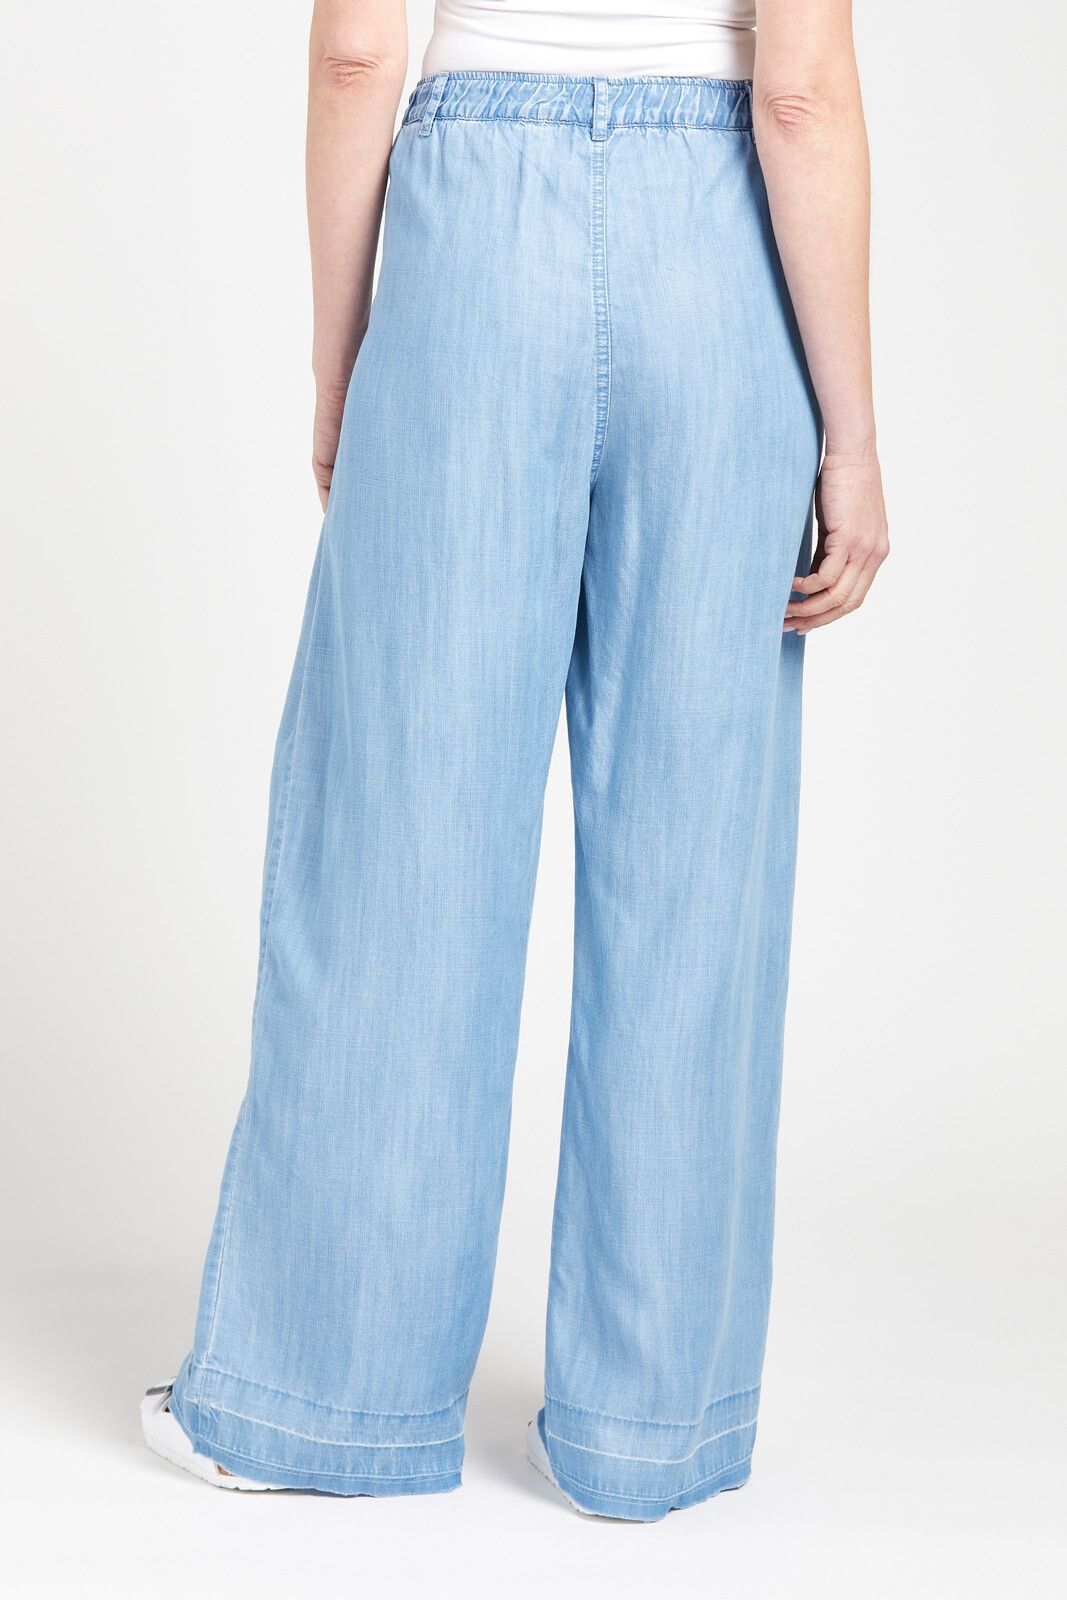 CLOTH AND STONE Cropped Breezy Pant | EVEREVE | Evereve